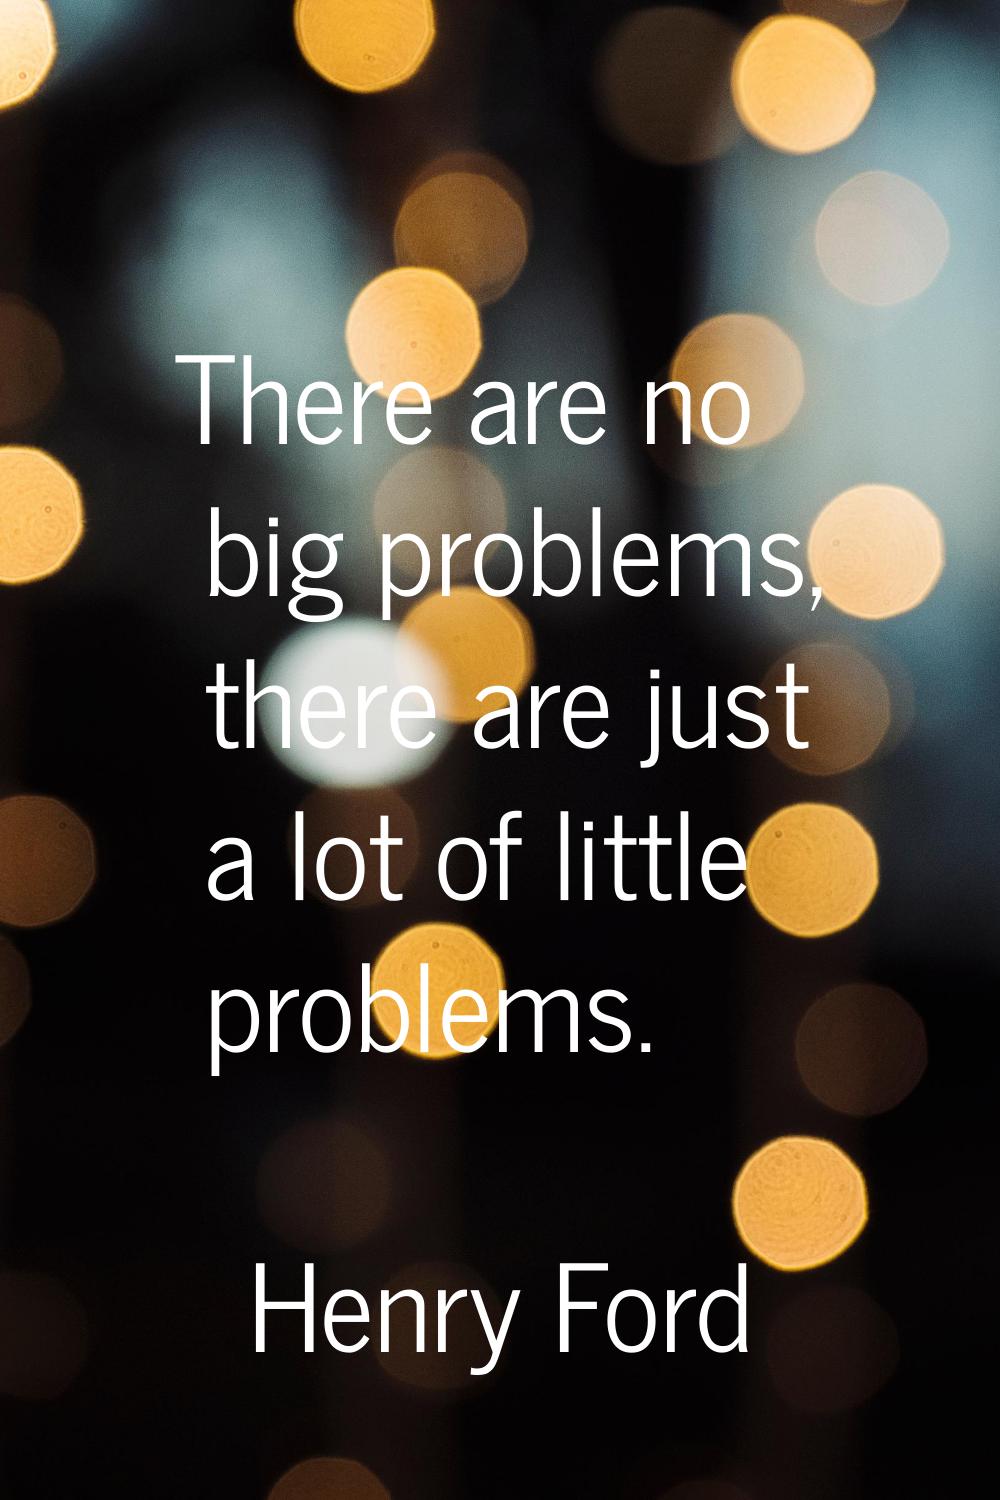 There are no big problems, there are just a lot of little problems.